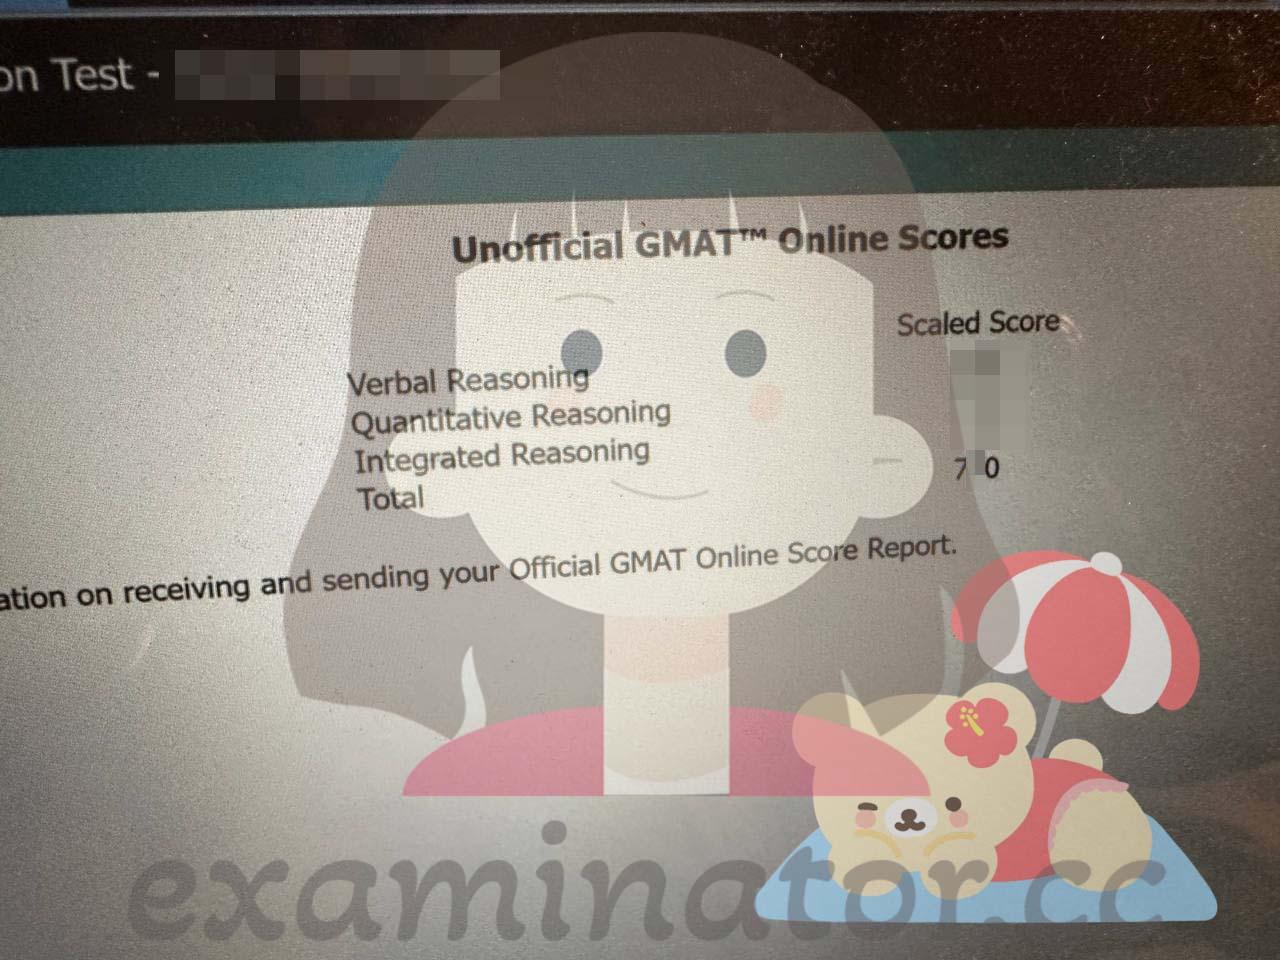 score image for GMAT Cheating success story #564